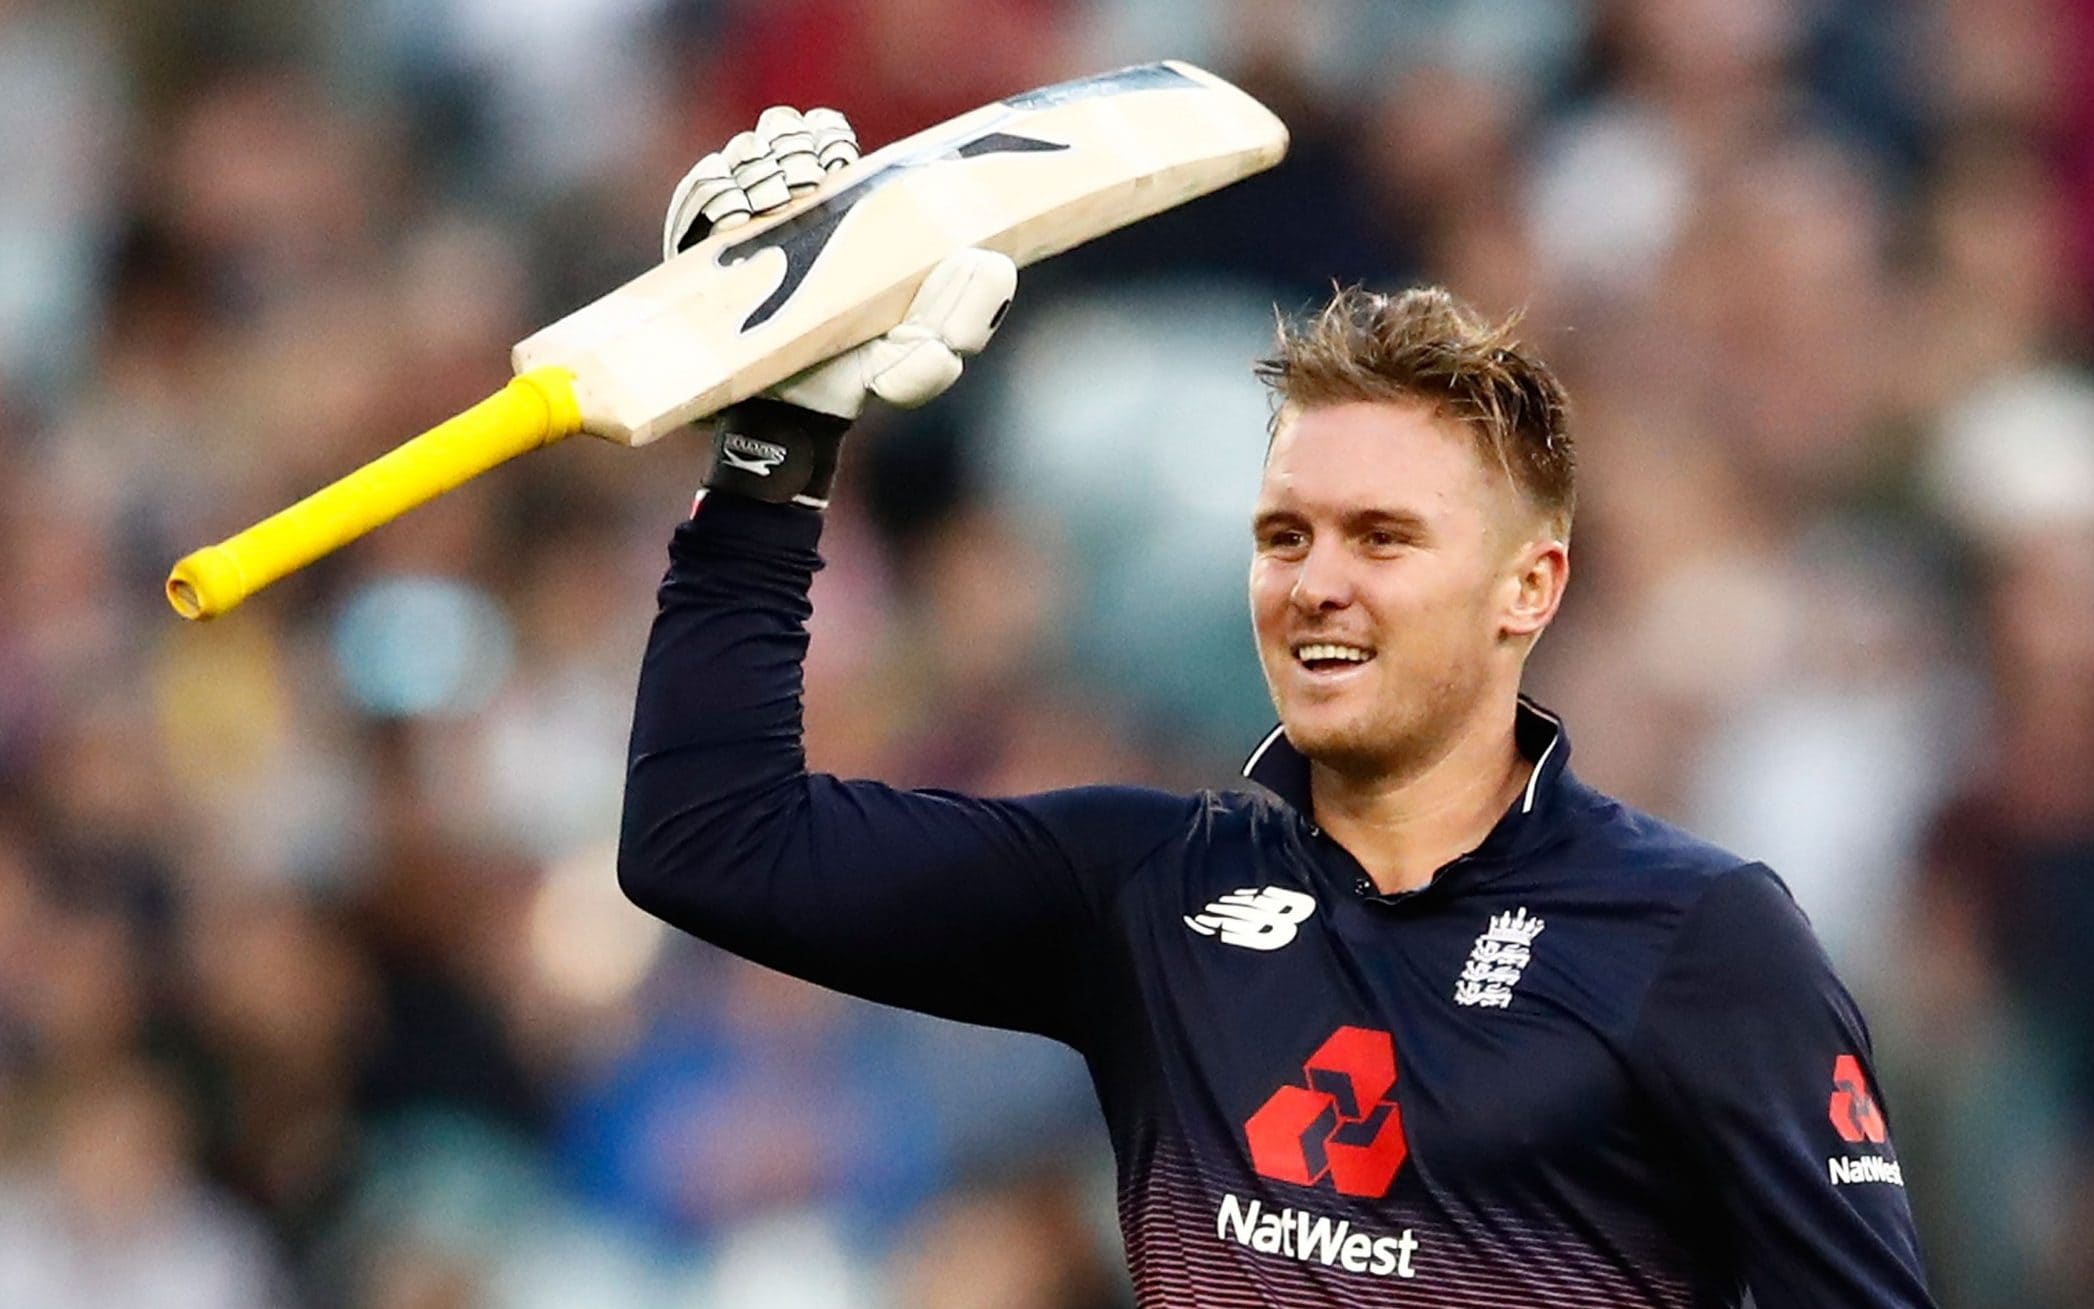 SA vs ENG: “I Was A Bit Overcome With A Few Emotions And Stuff Like That” – Jason Roy After His Terrific Ton vs South Africa